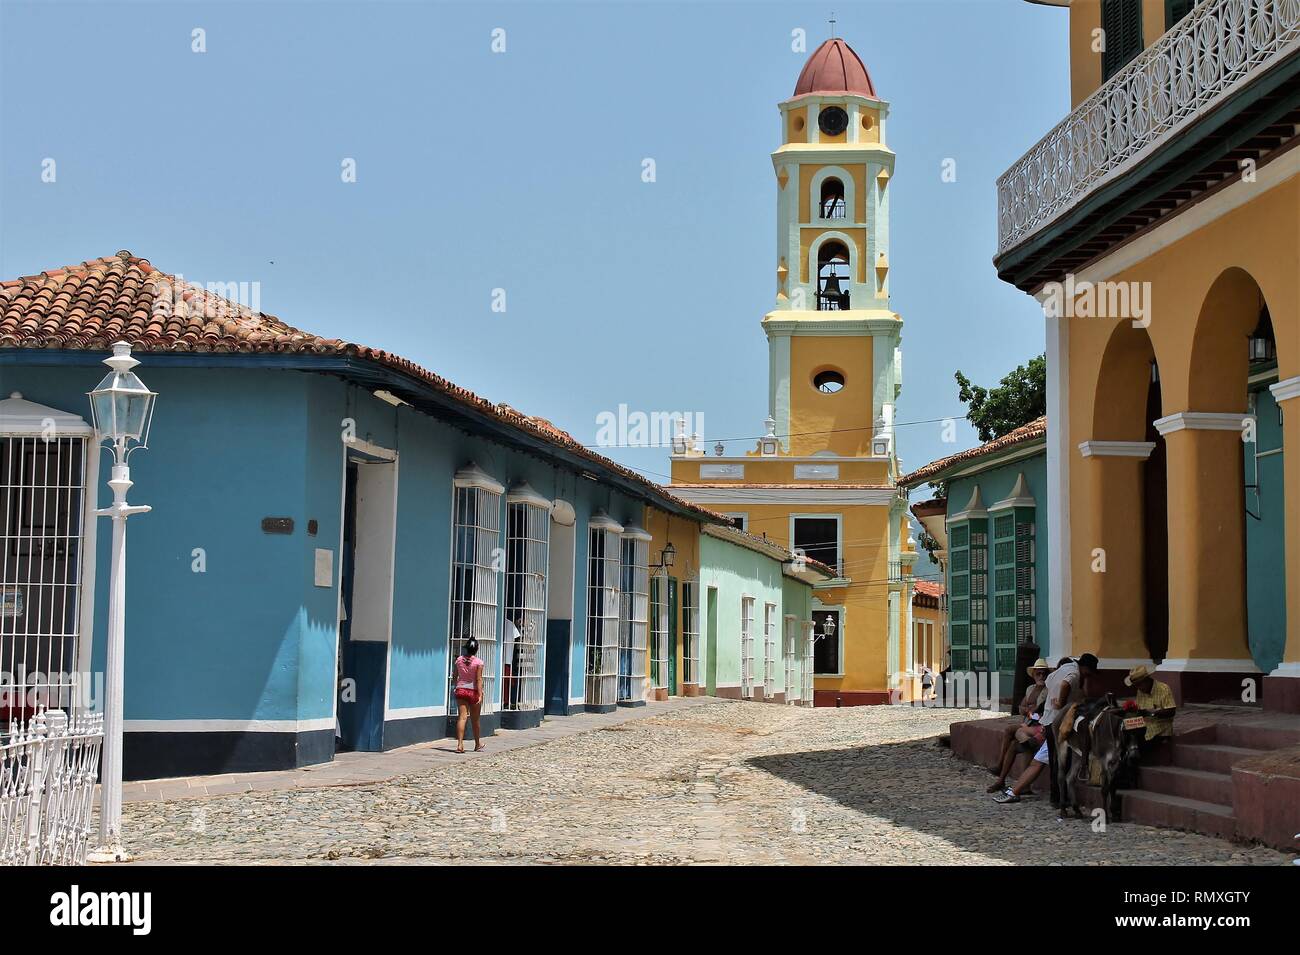 A colorful street with colonial houses, Trinidad, Cuba Stock Photo